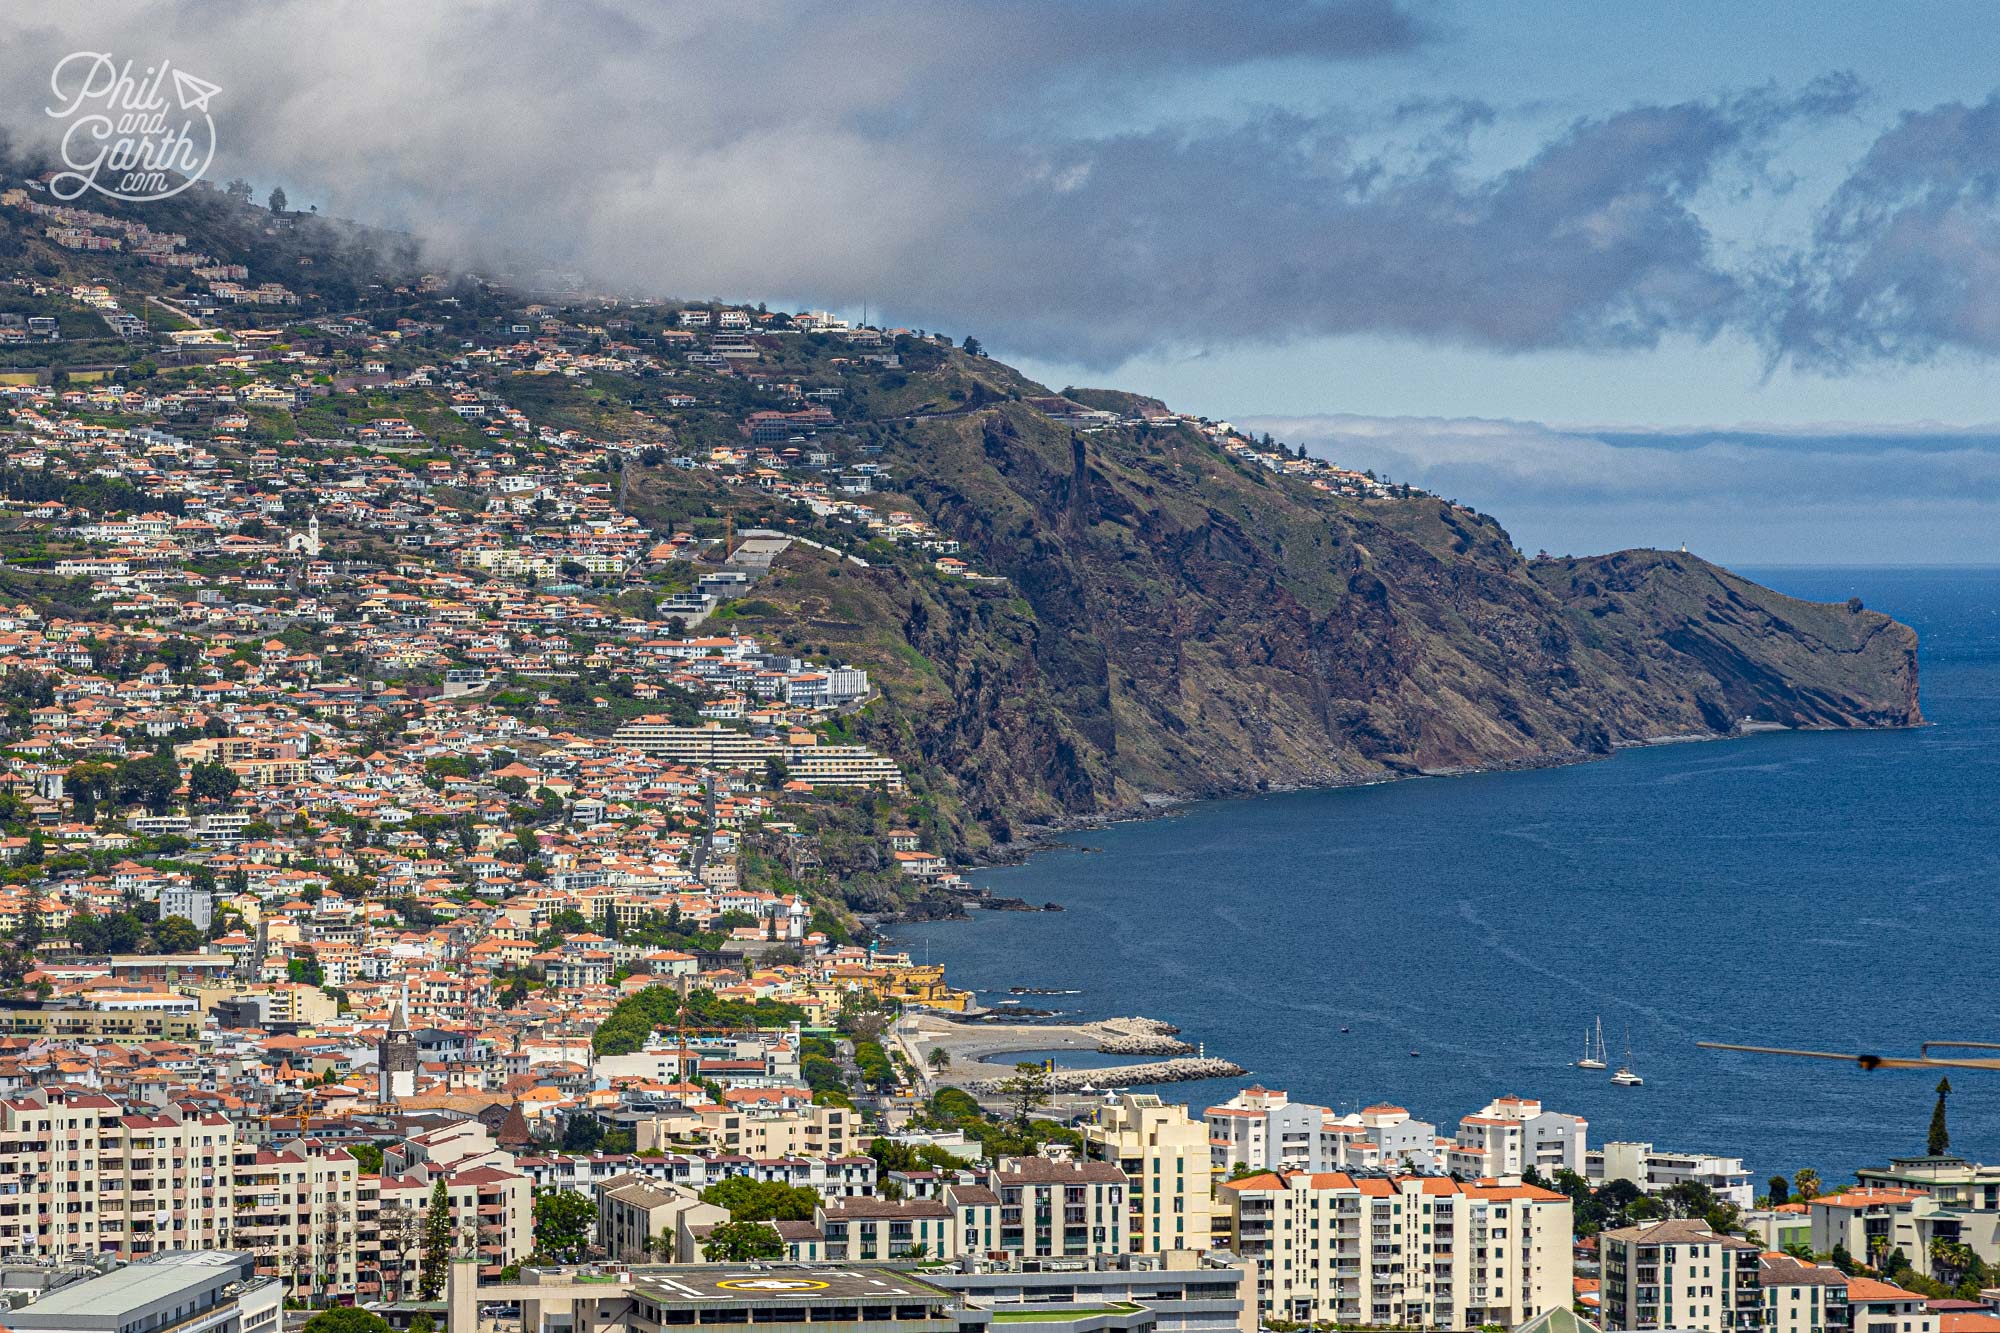 Funchal is built on the slopes of a natural amphitheatre